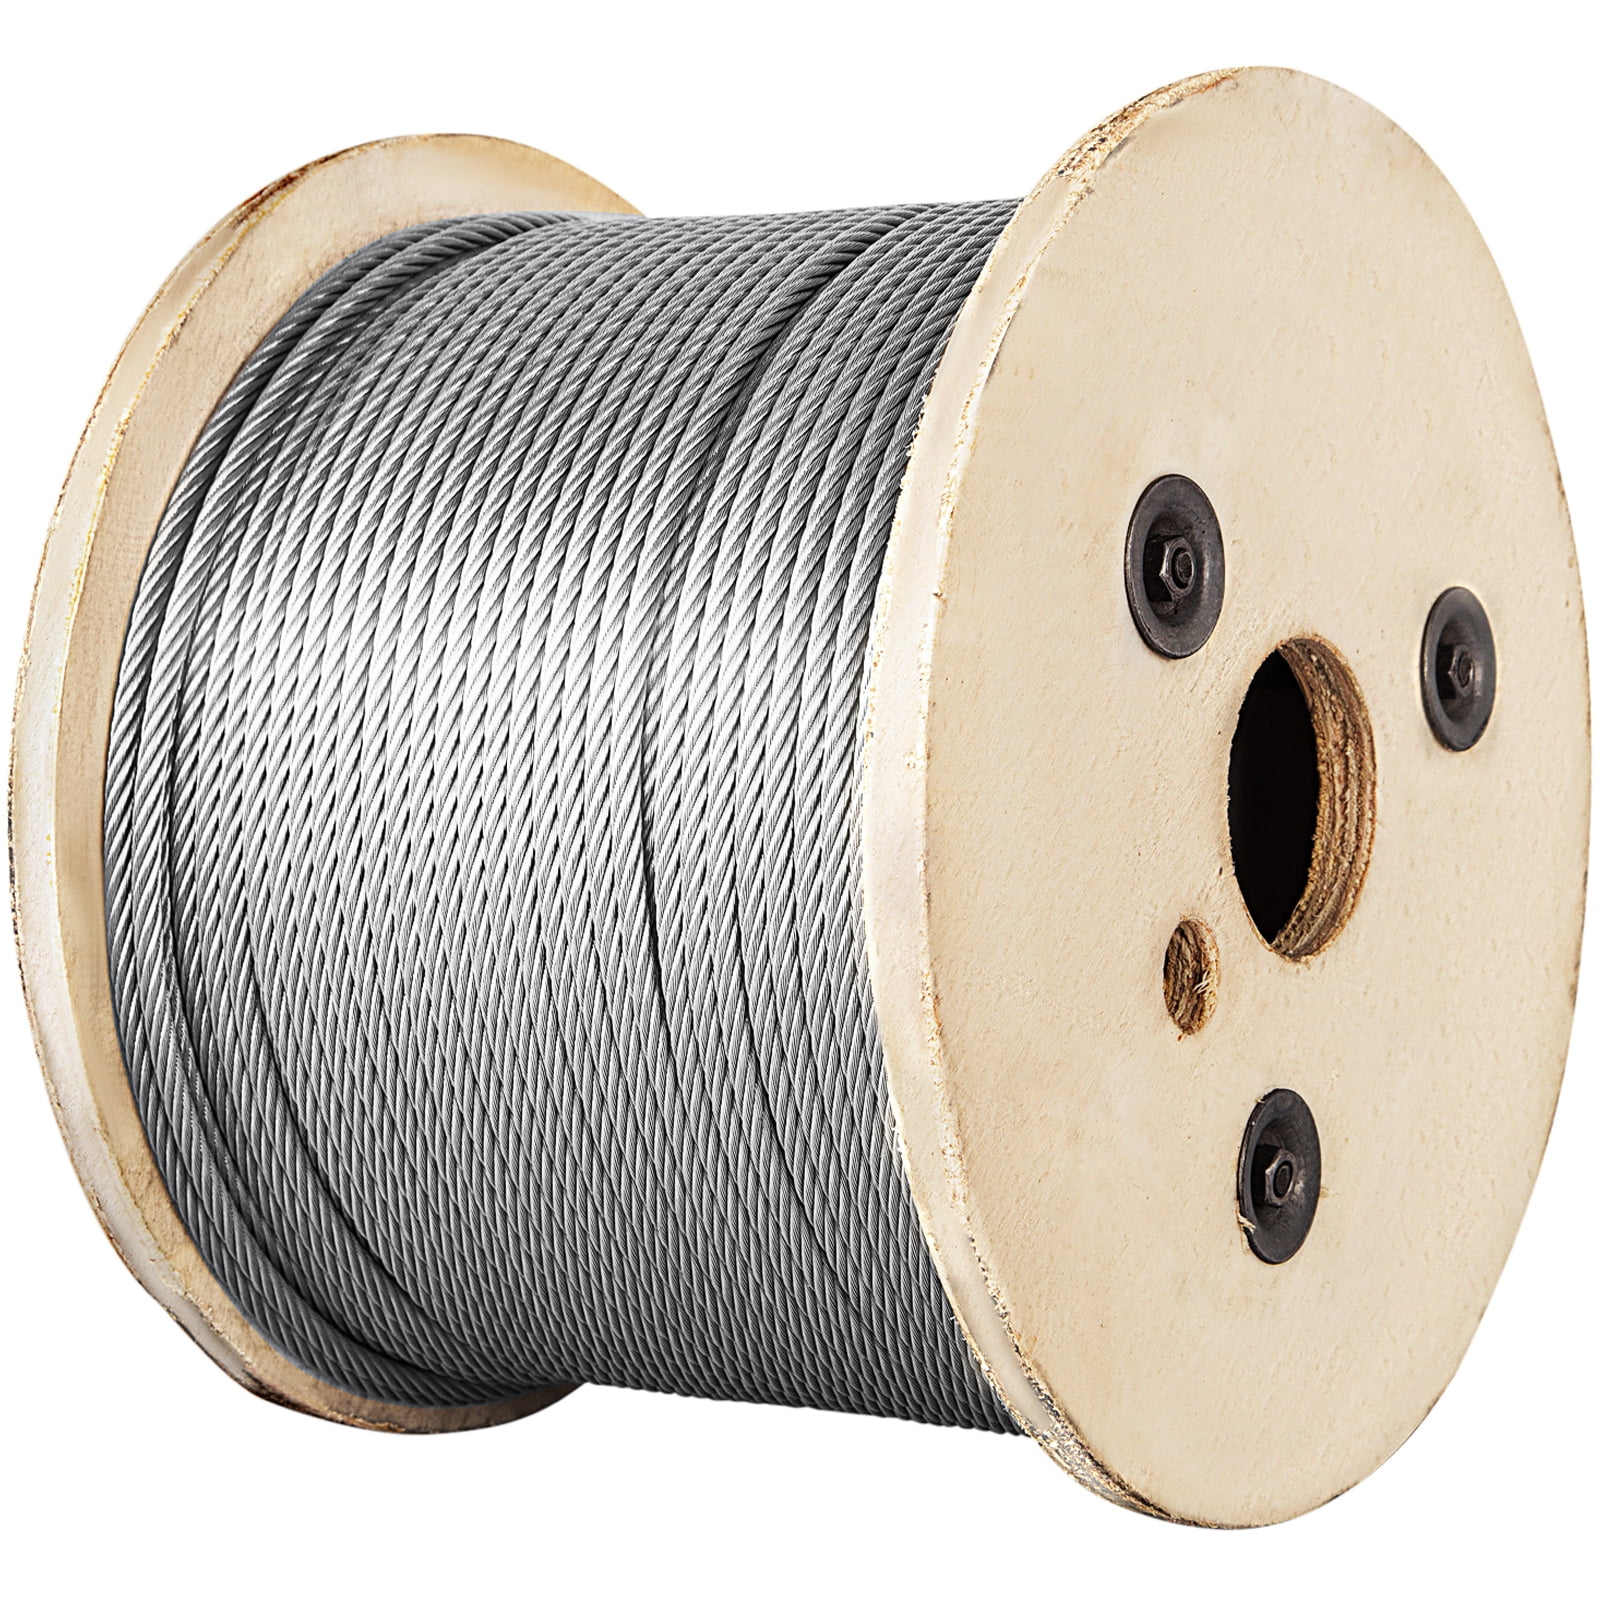 Stainless Steel Wire Rope - 316 - 0.236 inch/6 mm - 76,25 feet/25 meter - Stainless  Steel Wire : Wires and Rods Online Shop